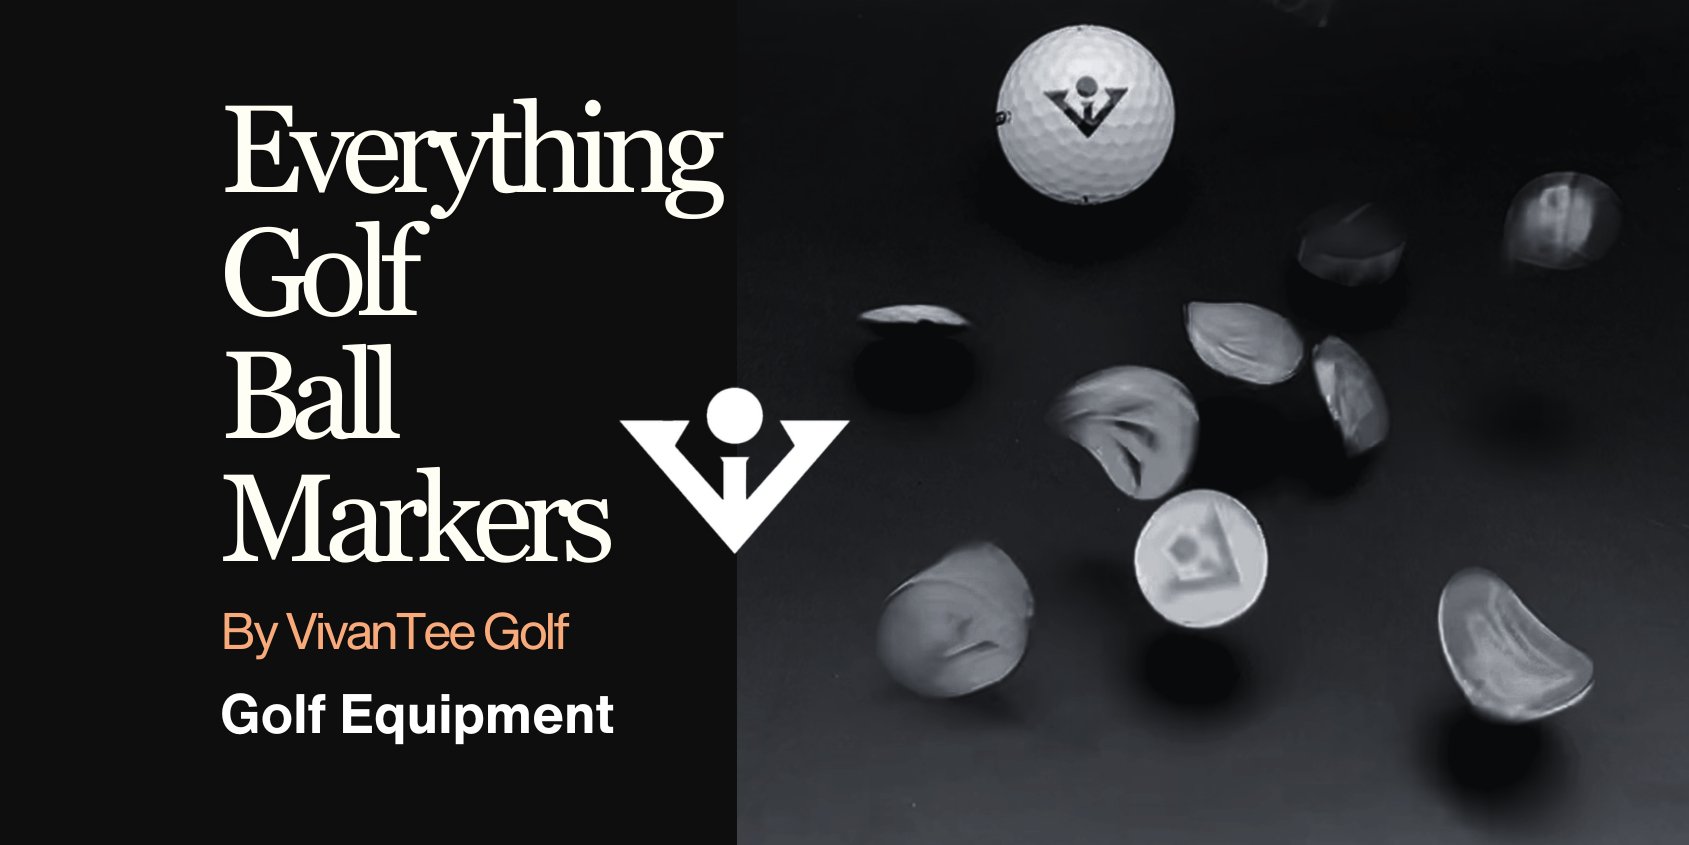 Various Signature VivanTee Golf Ball Markers, showing our unique designs and flair.